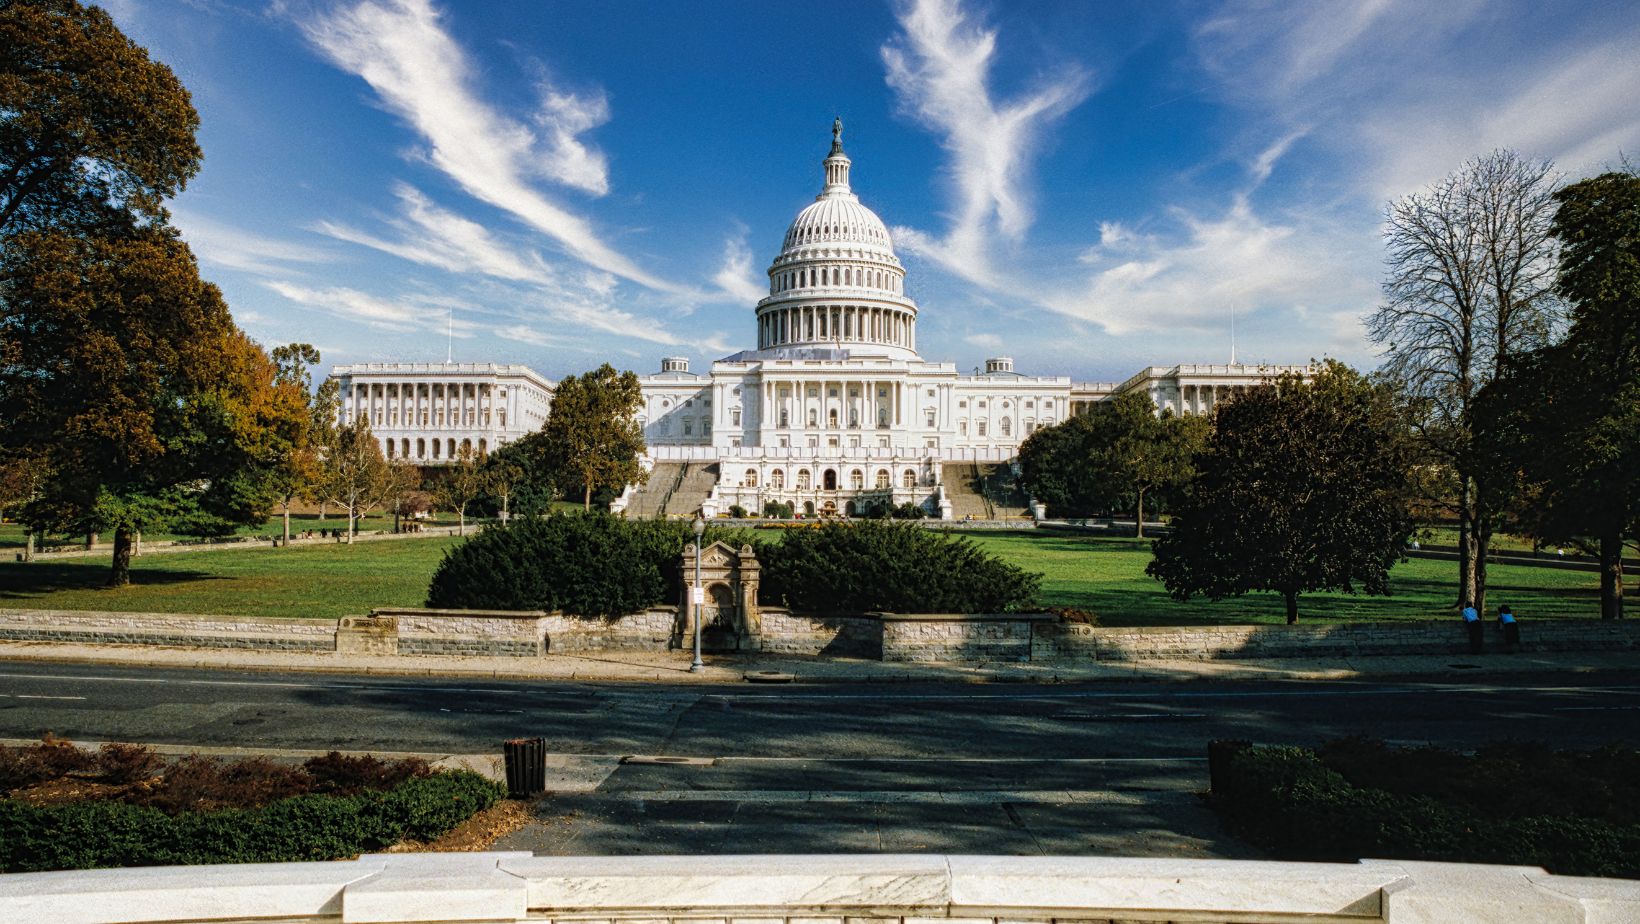 Top Hotels for Budget Vacations to Alexandria and Washington, D.C.